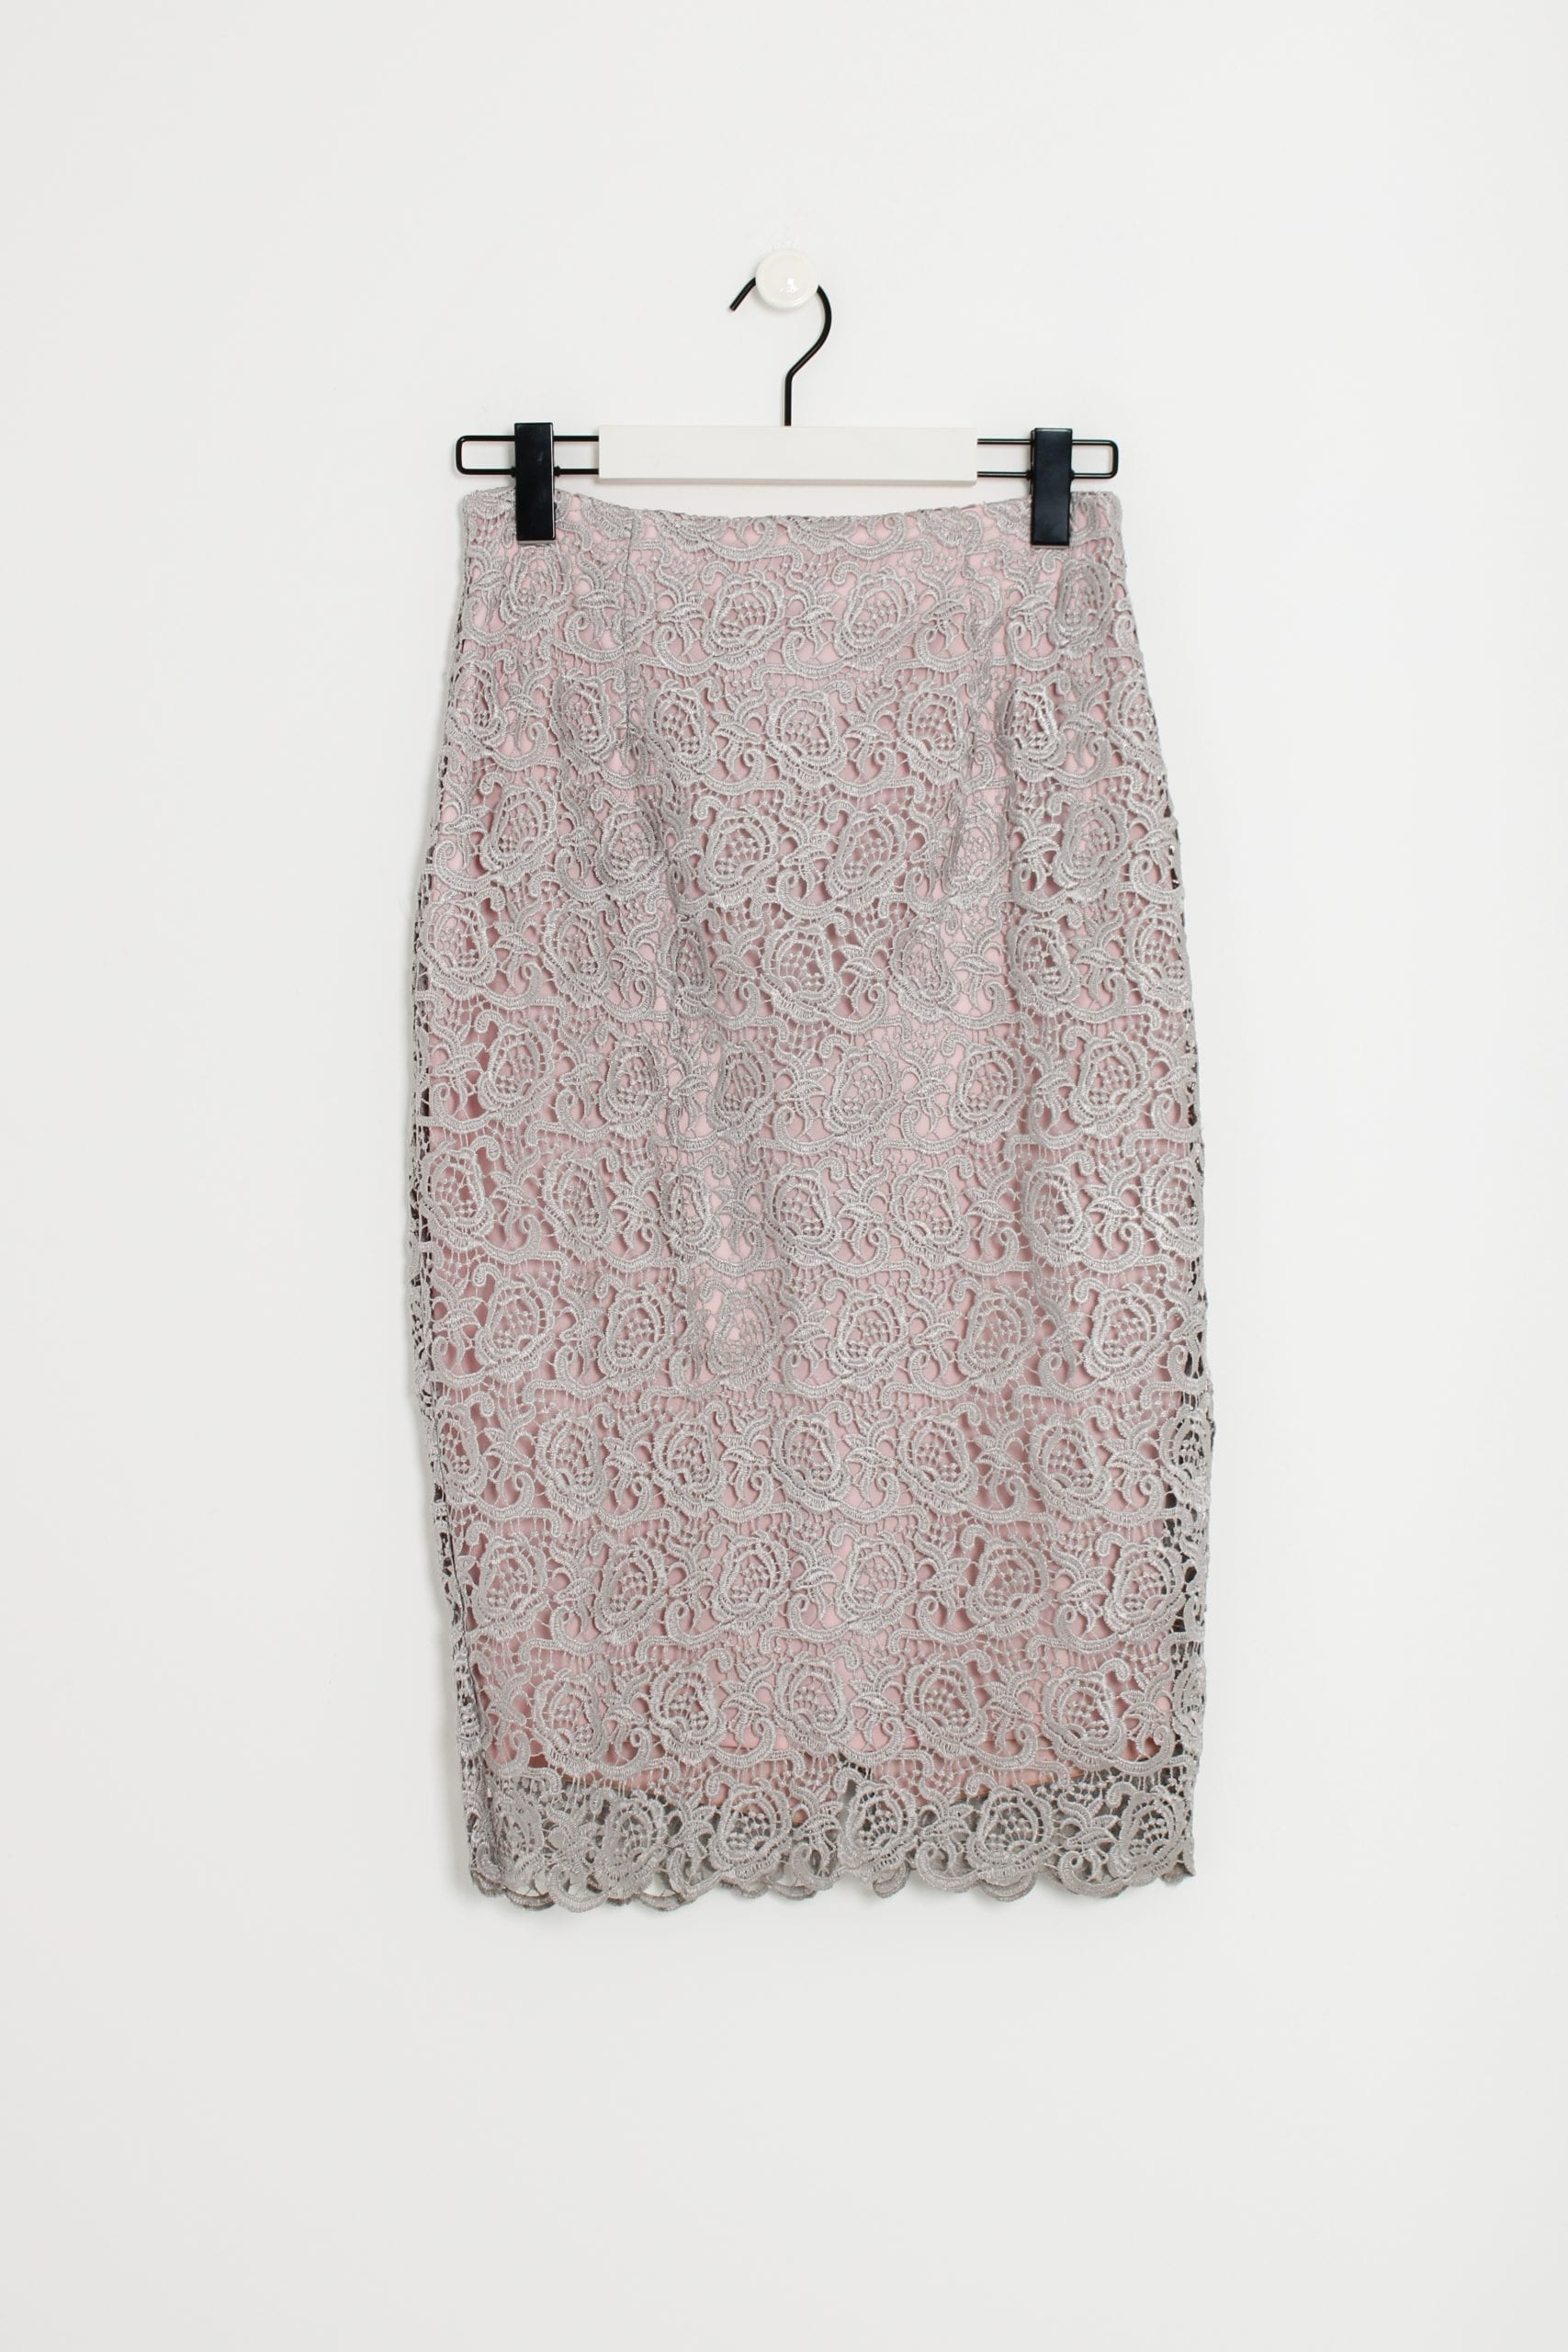 Silver and pink lace skirt - Swapology